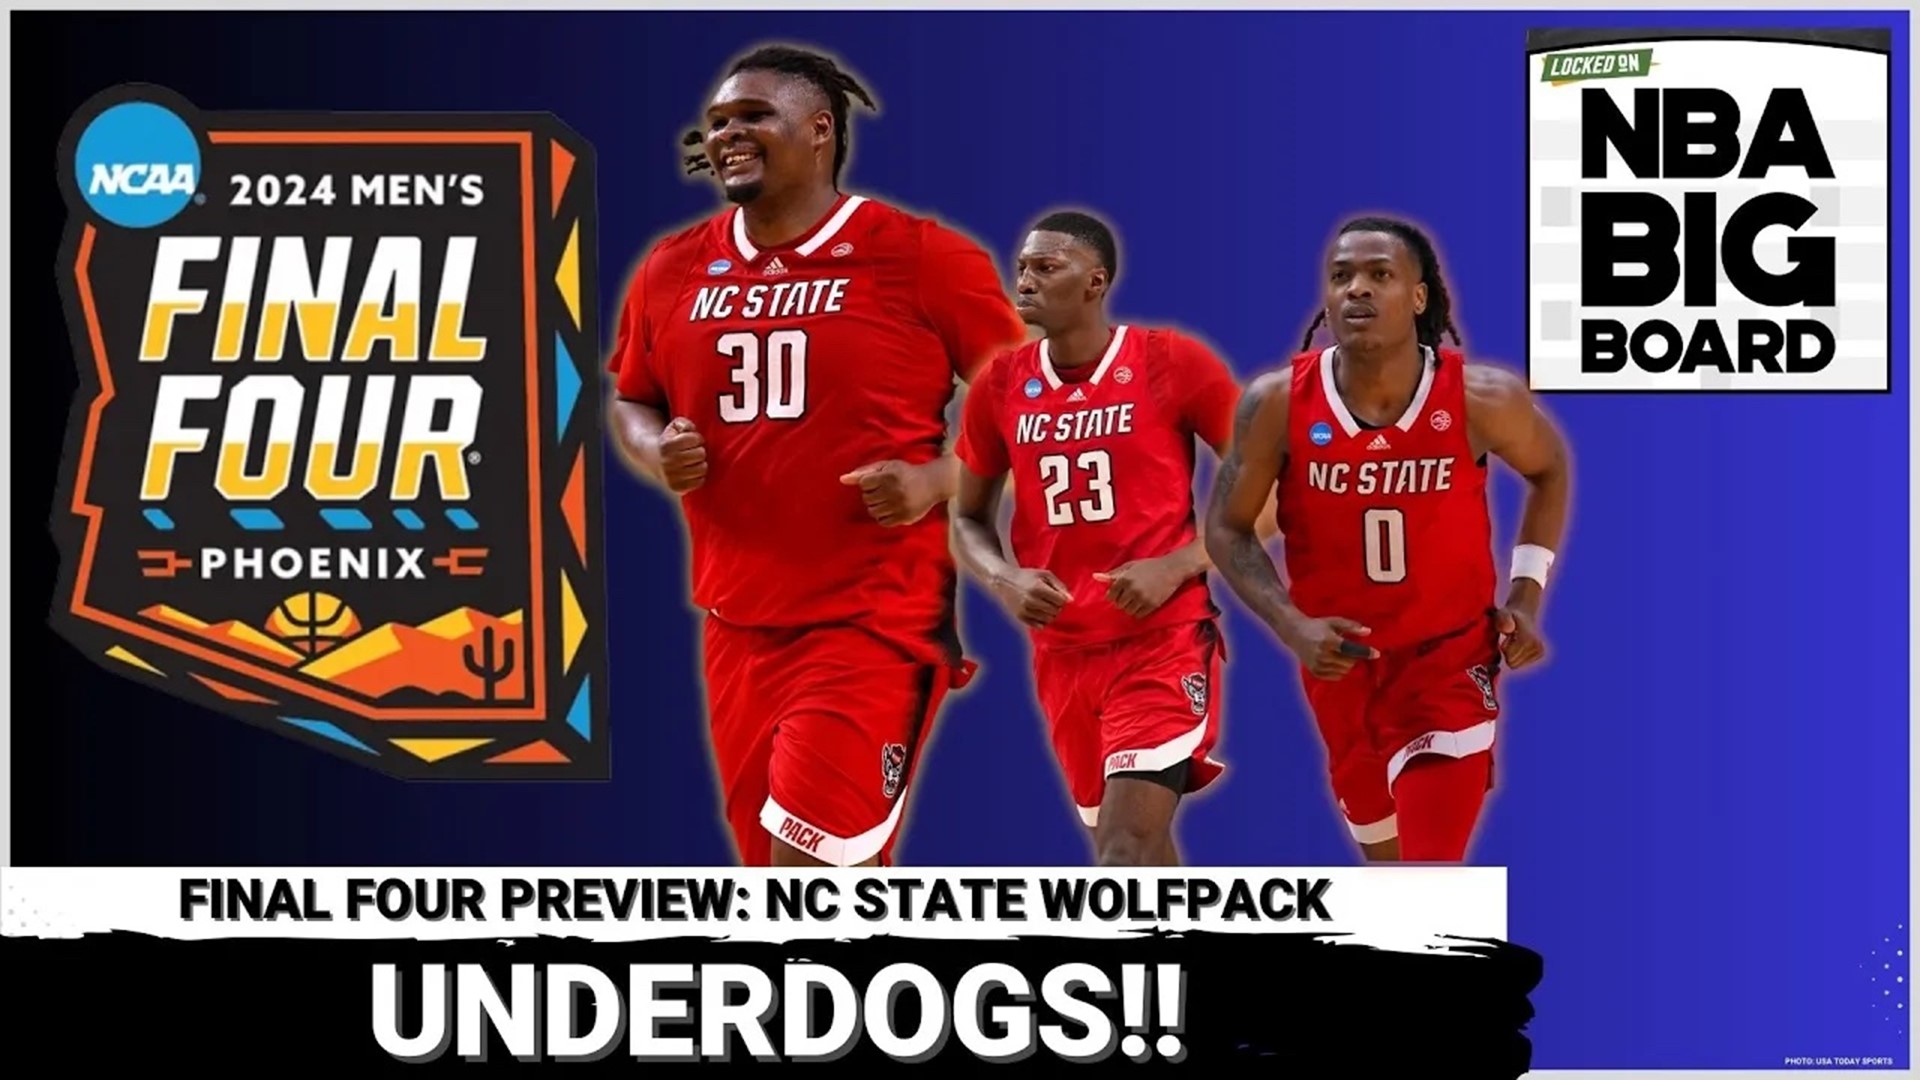 In this episode of the NBA Big Board Podcast, hosts Rafael and James Barlowe explore NC State's Final Four roster.